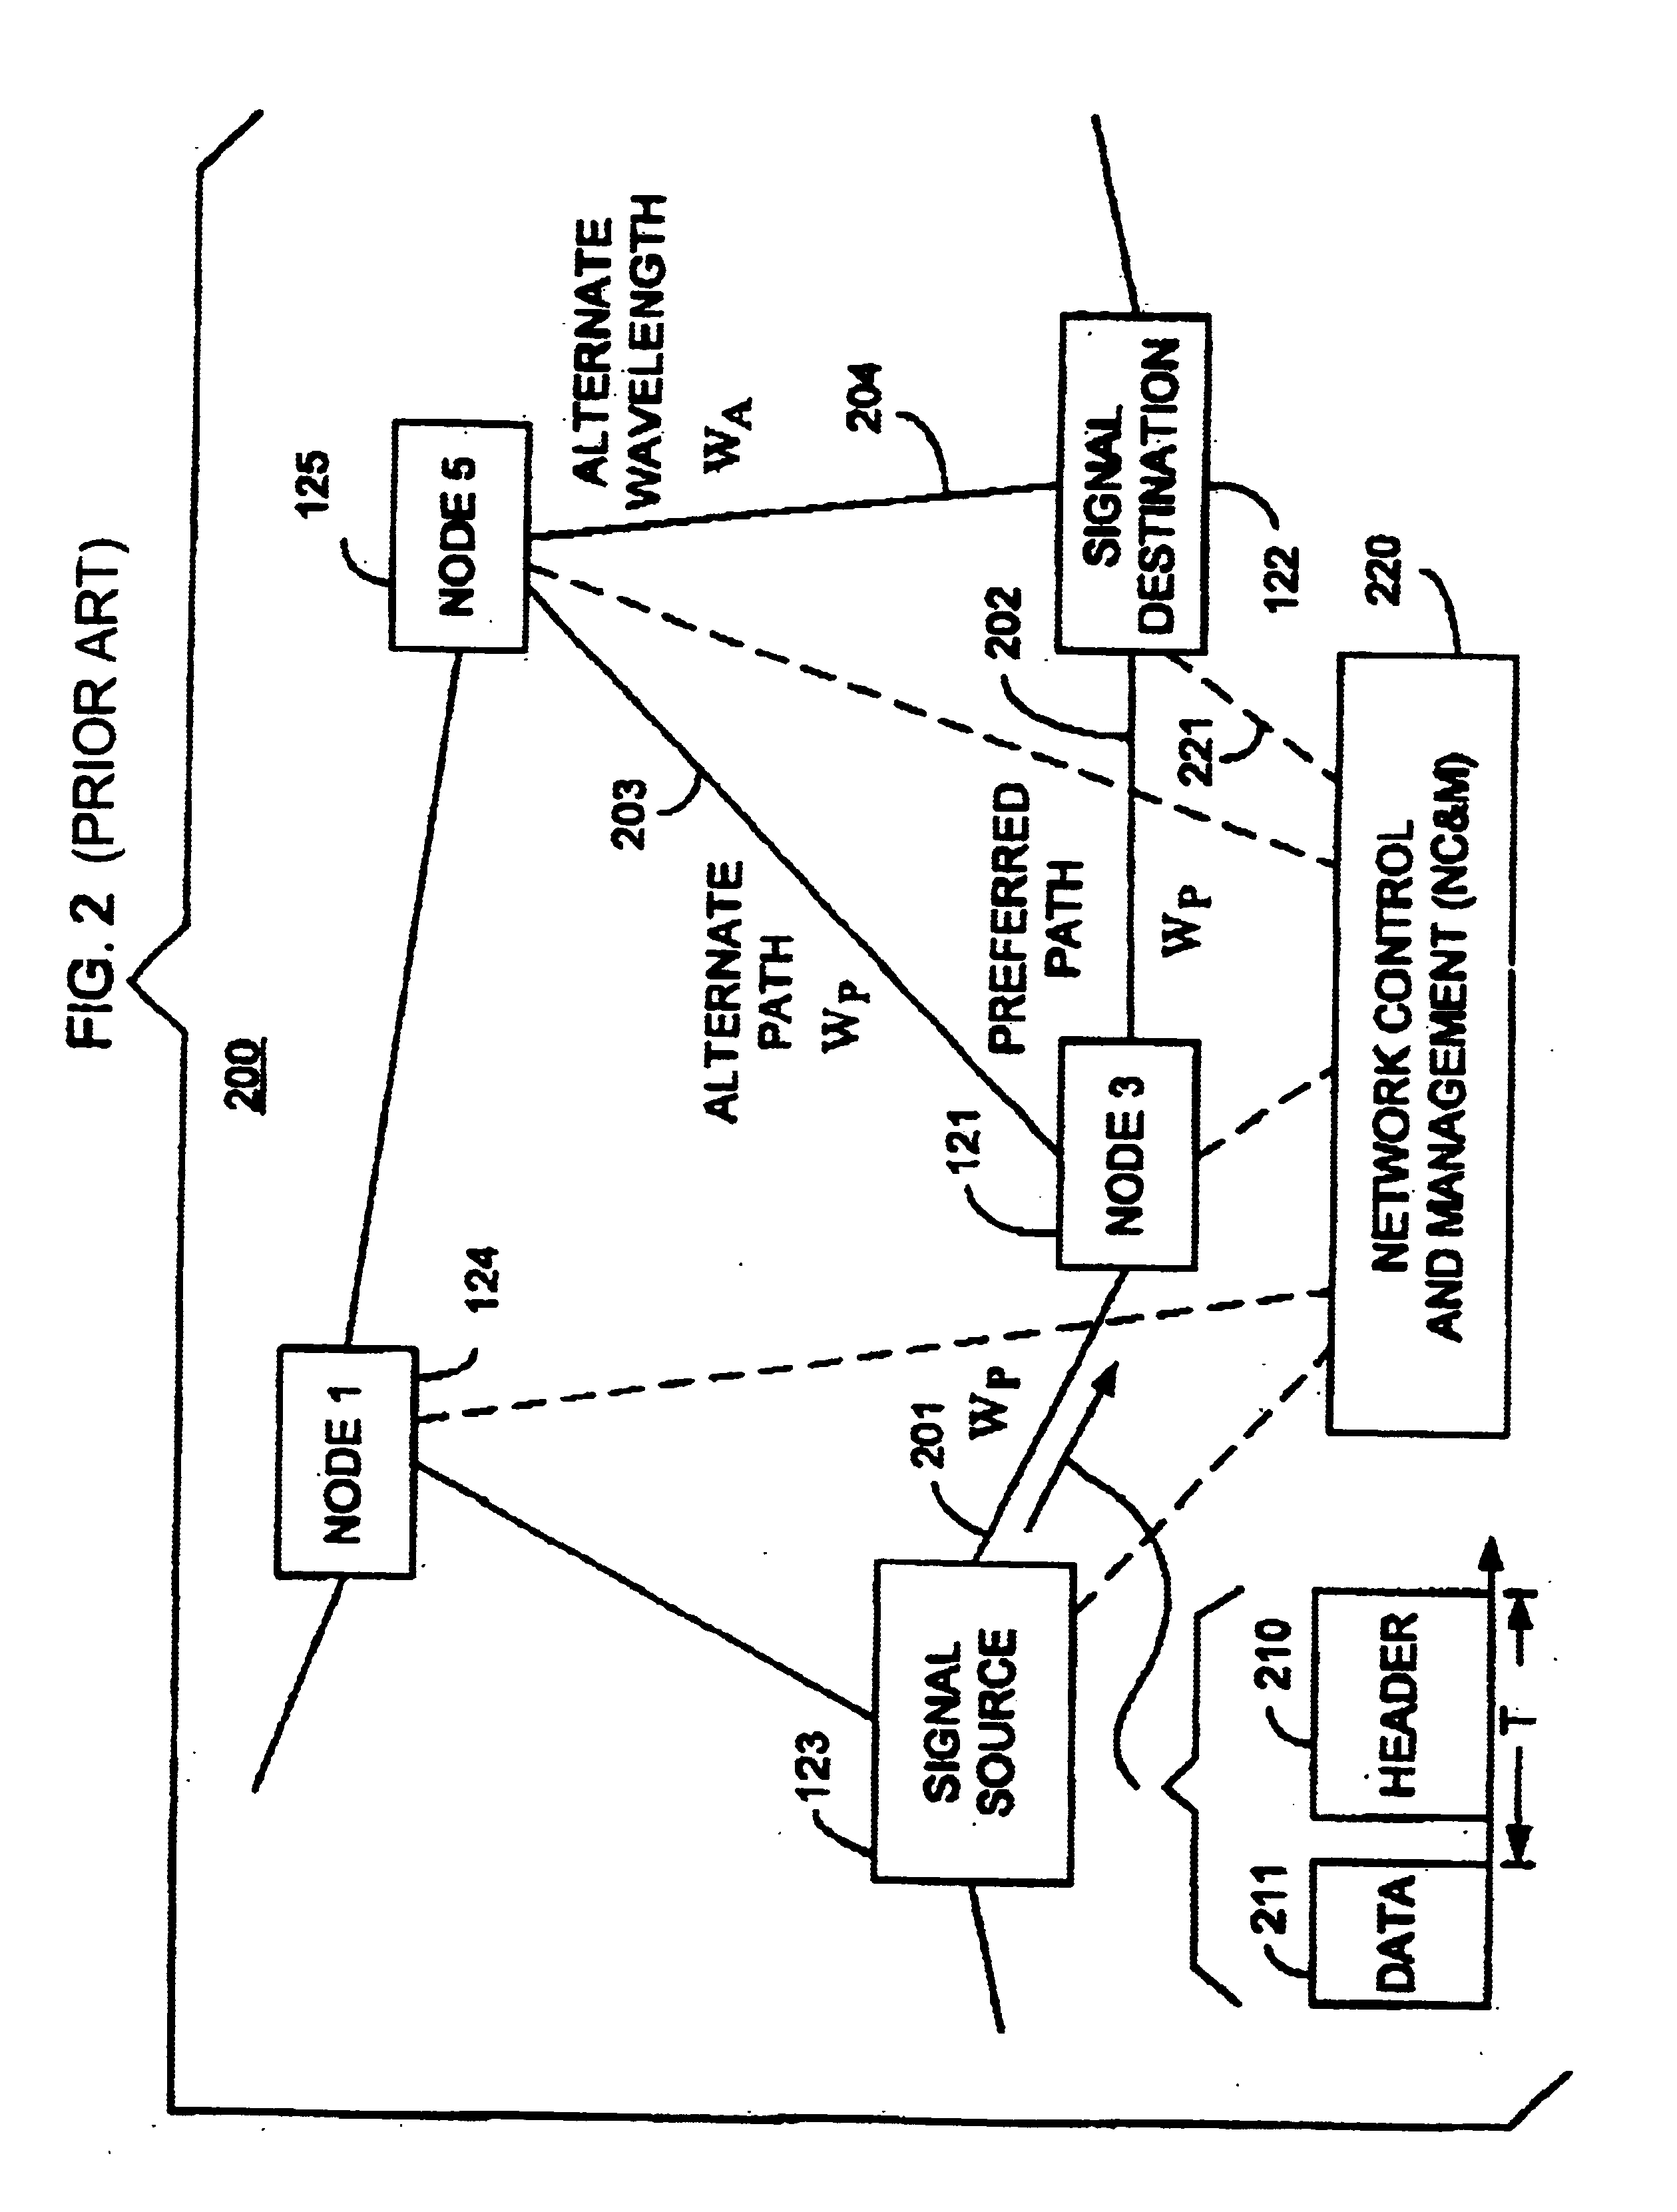 Optical layer multicasting using a single sub-carrier header and a multicast switch with active header insertion